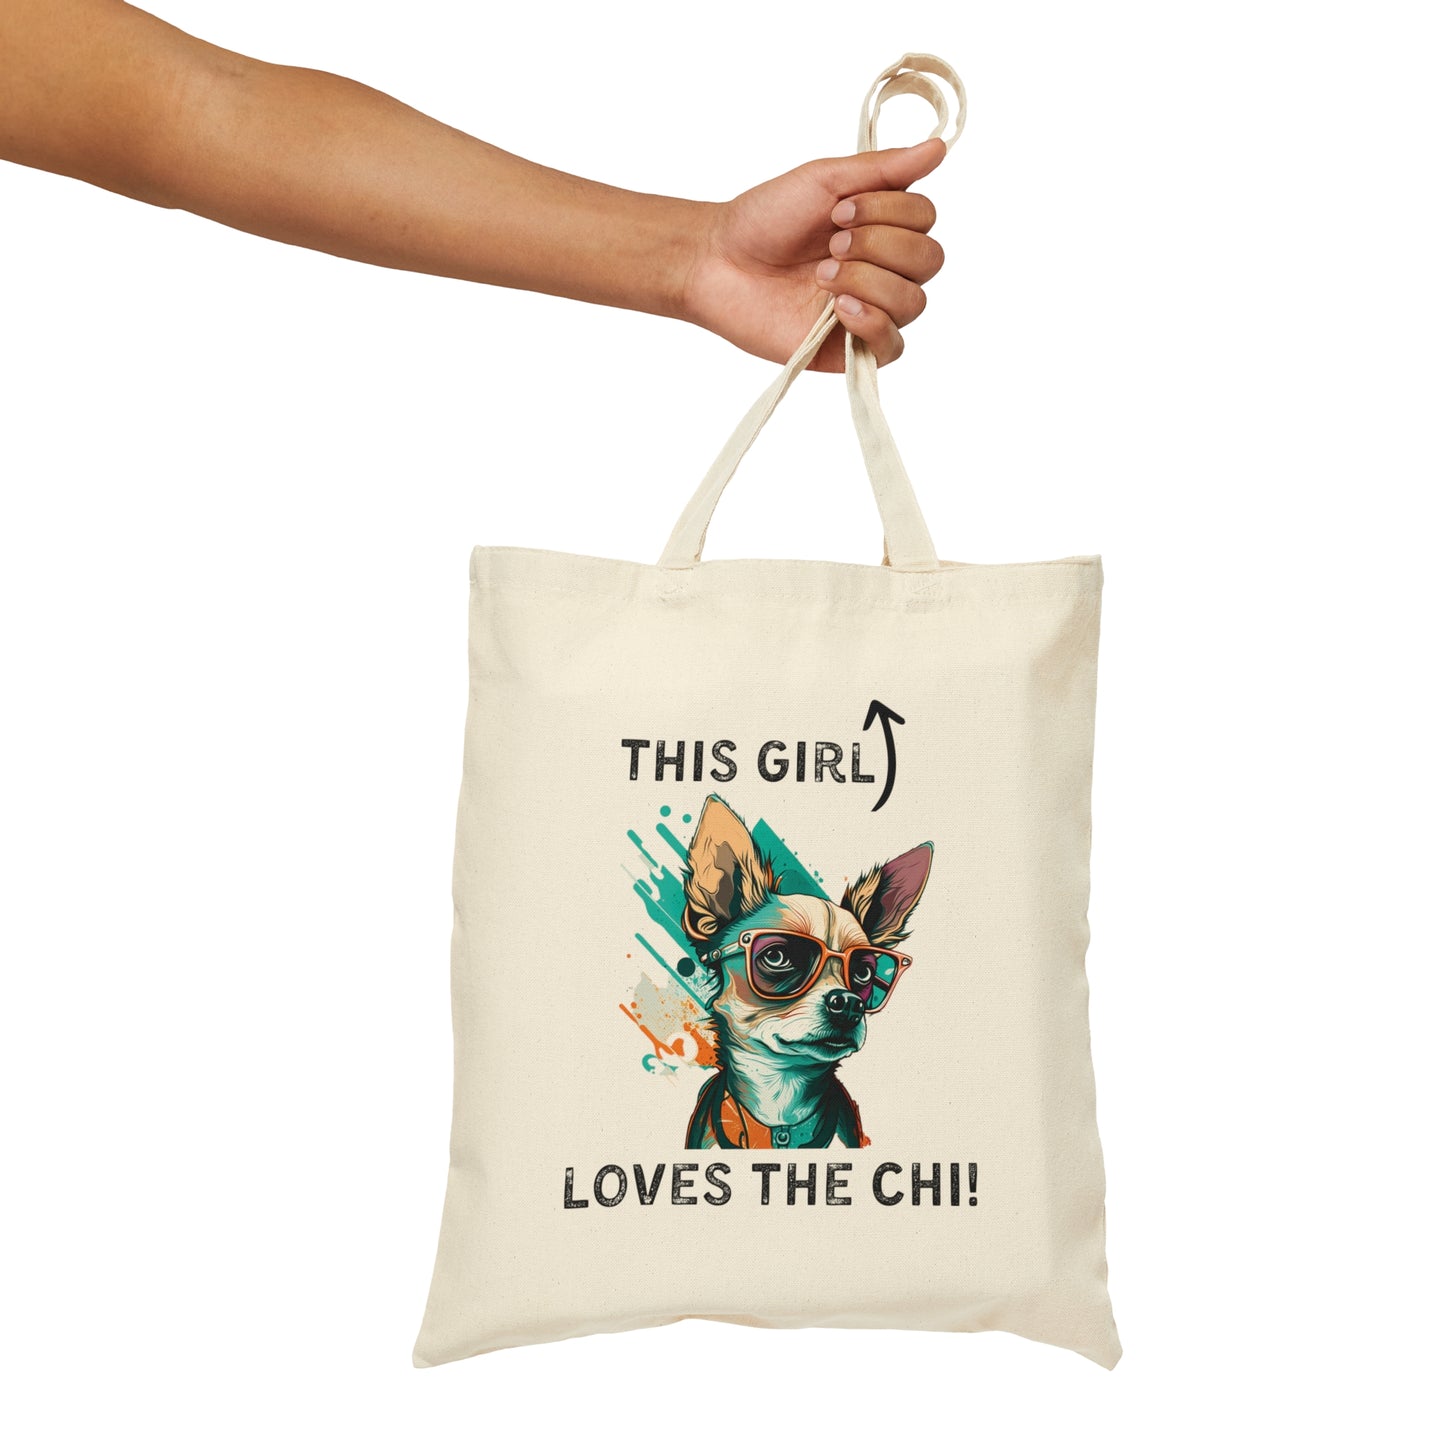 This Girl Loves The Chi tote bag